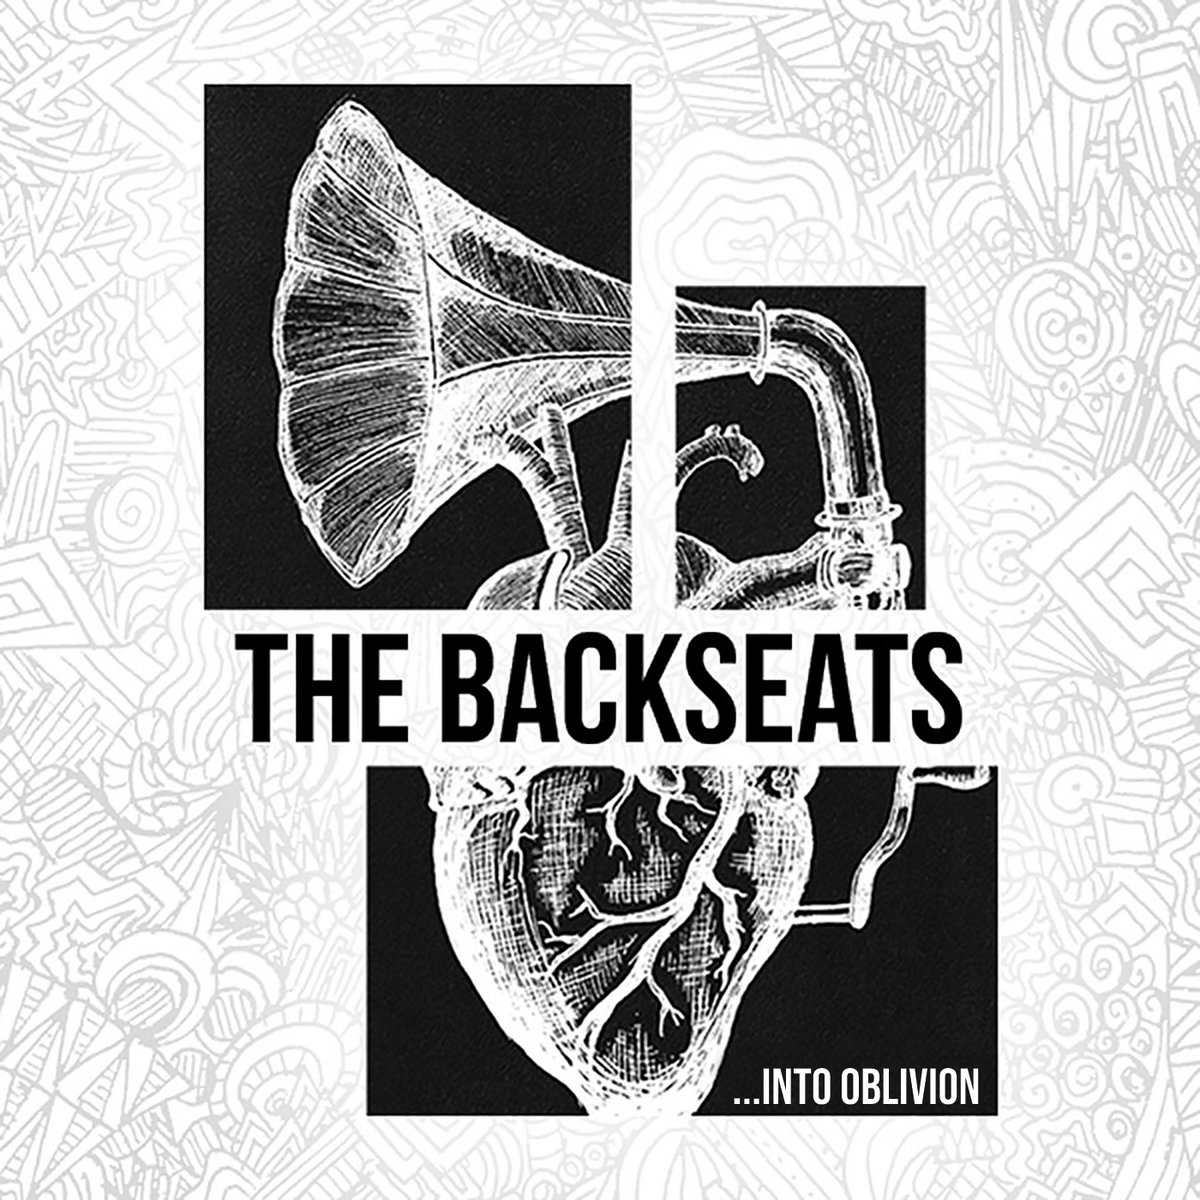 The Backseats - Going Further (2016) Rock punk desde Madrid. A1442609368_10